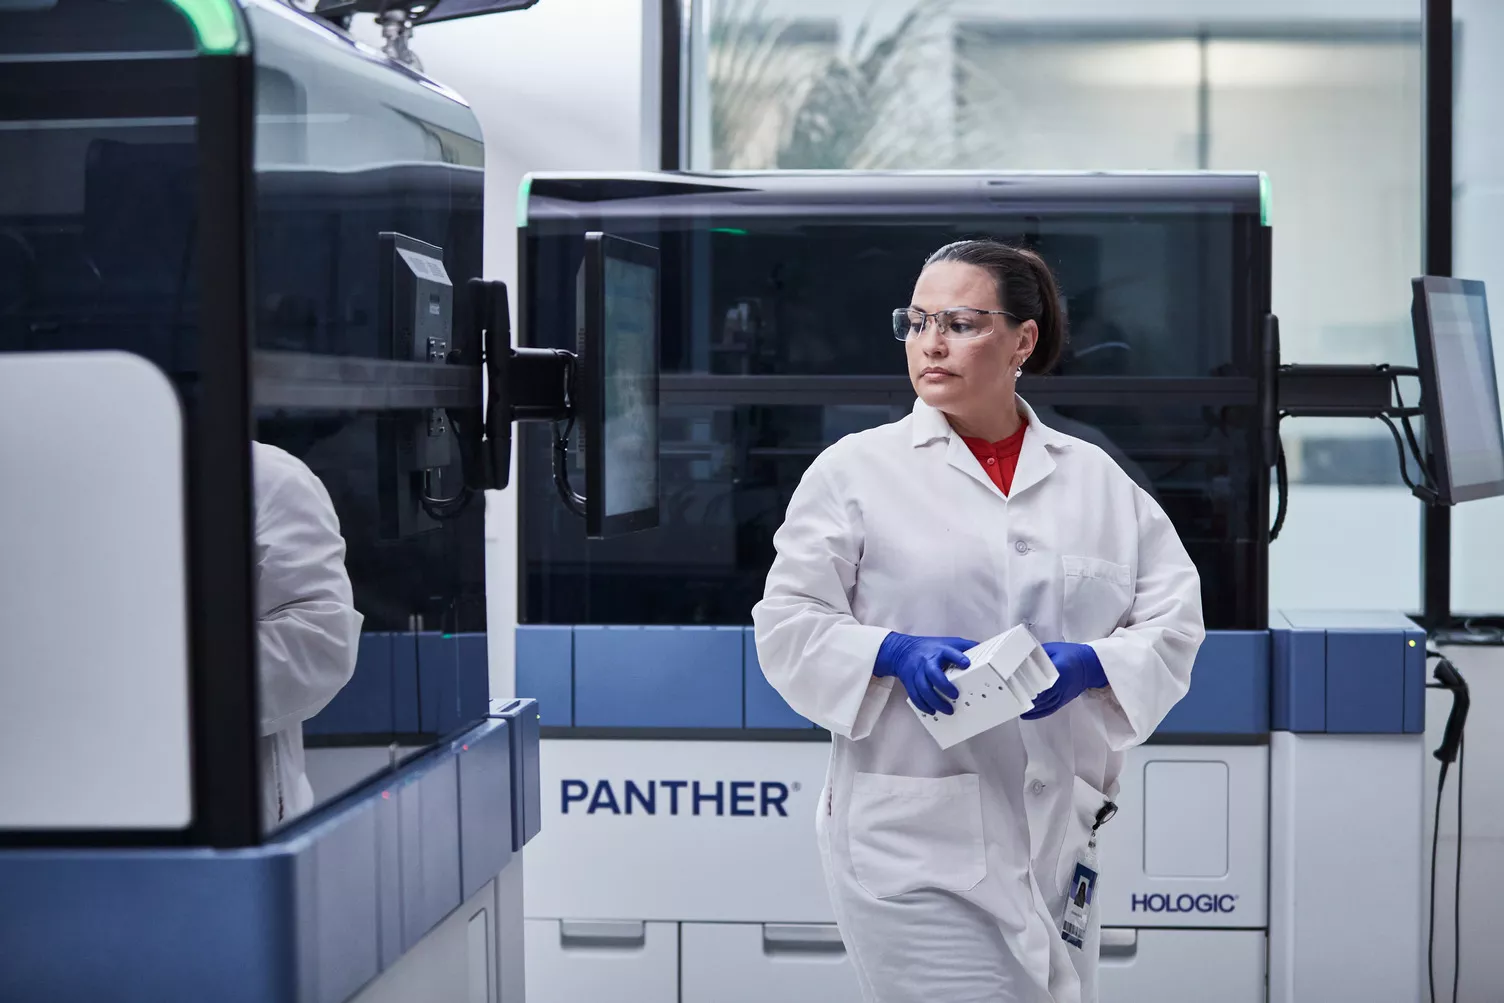 Female lab technician observing Panther systems in lab setting